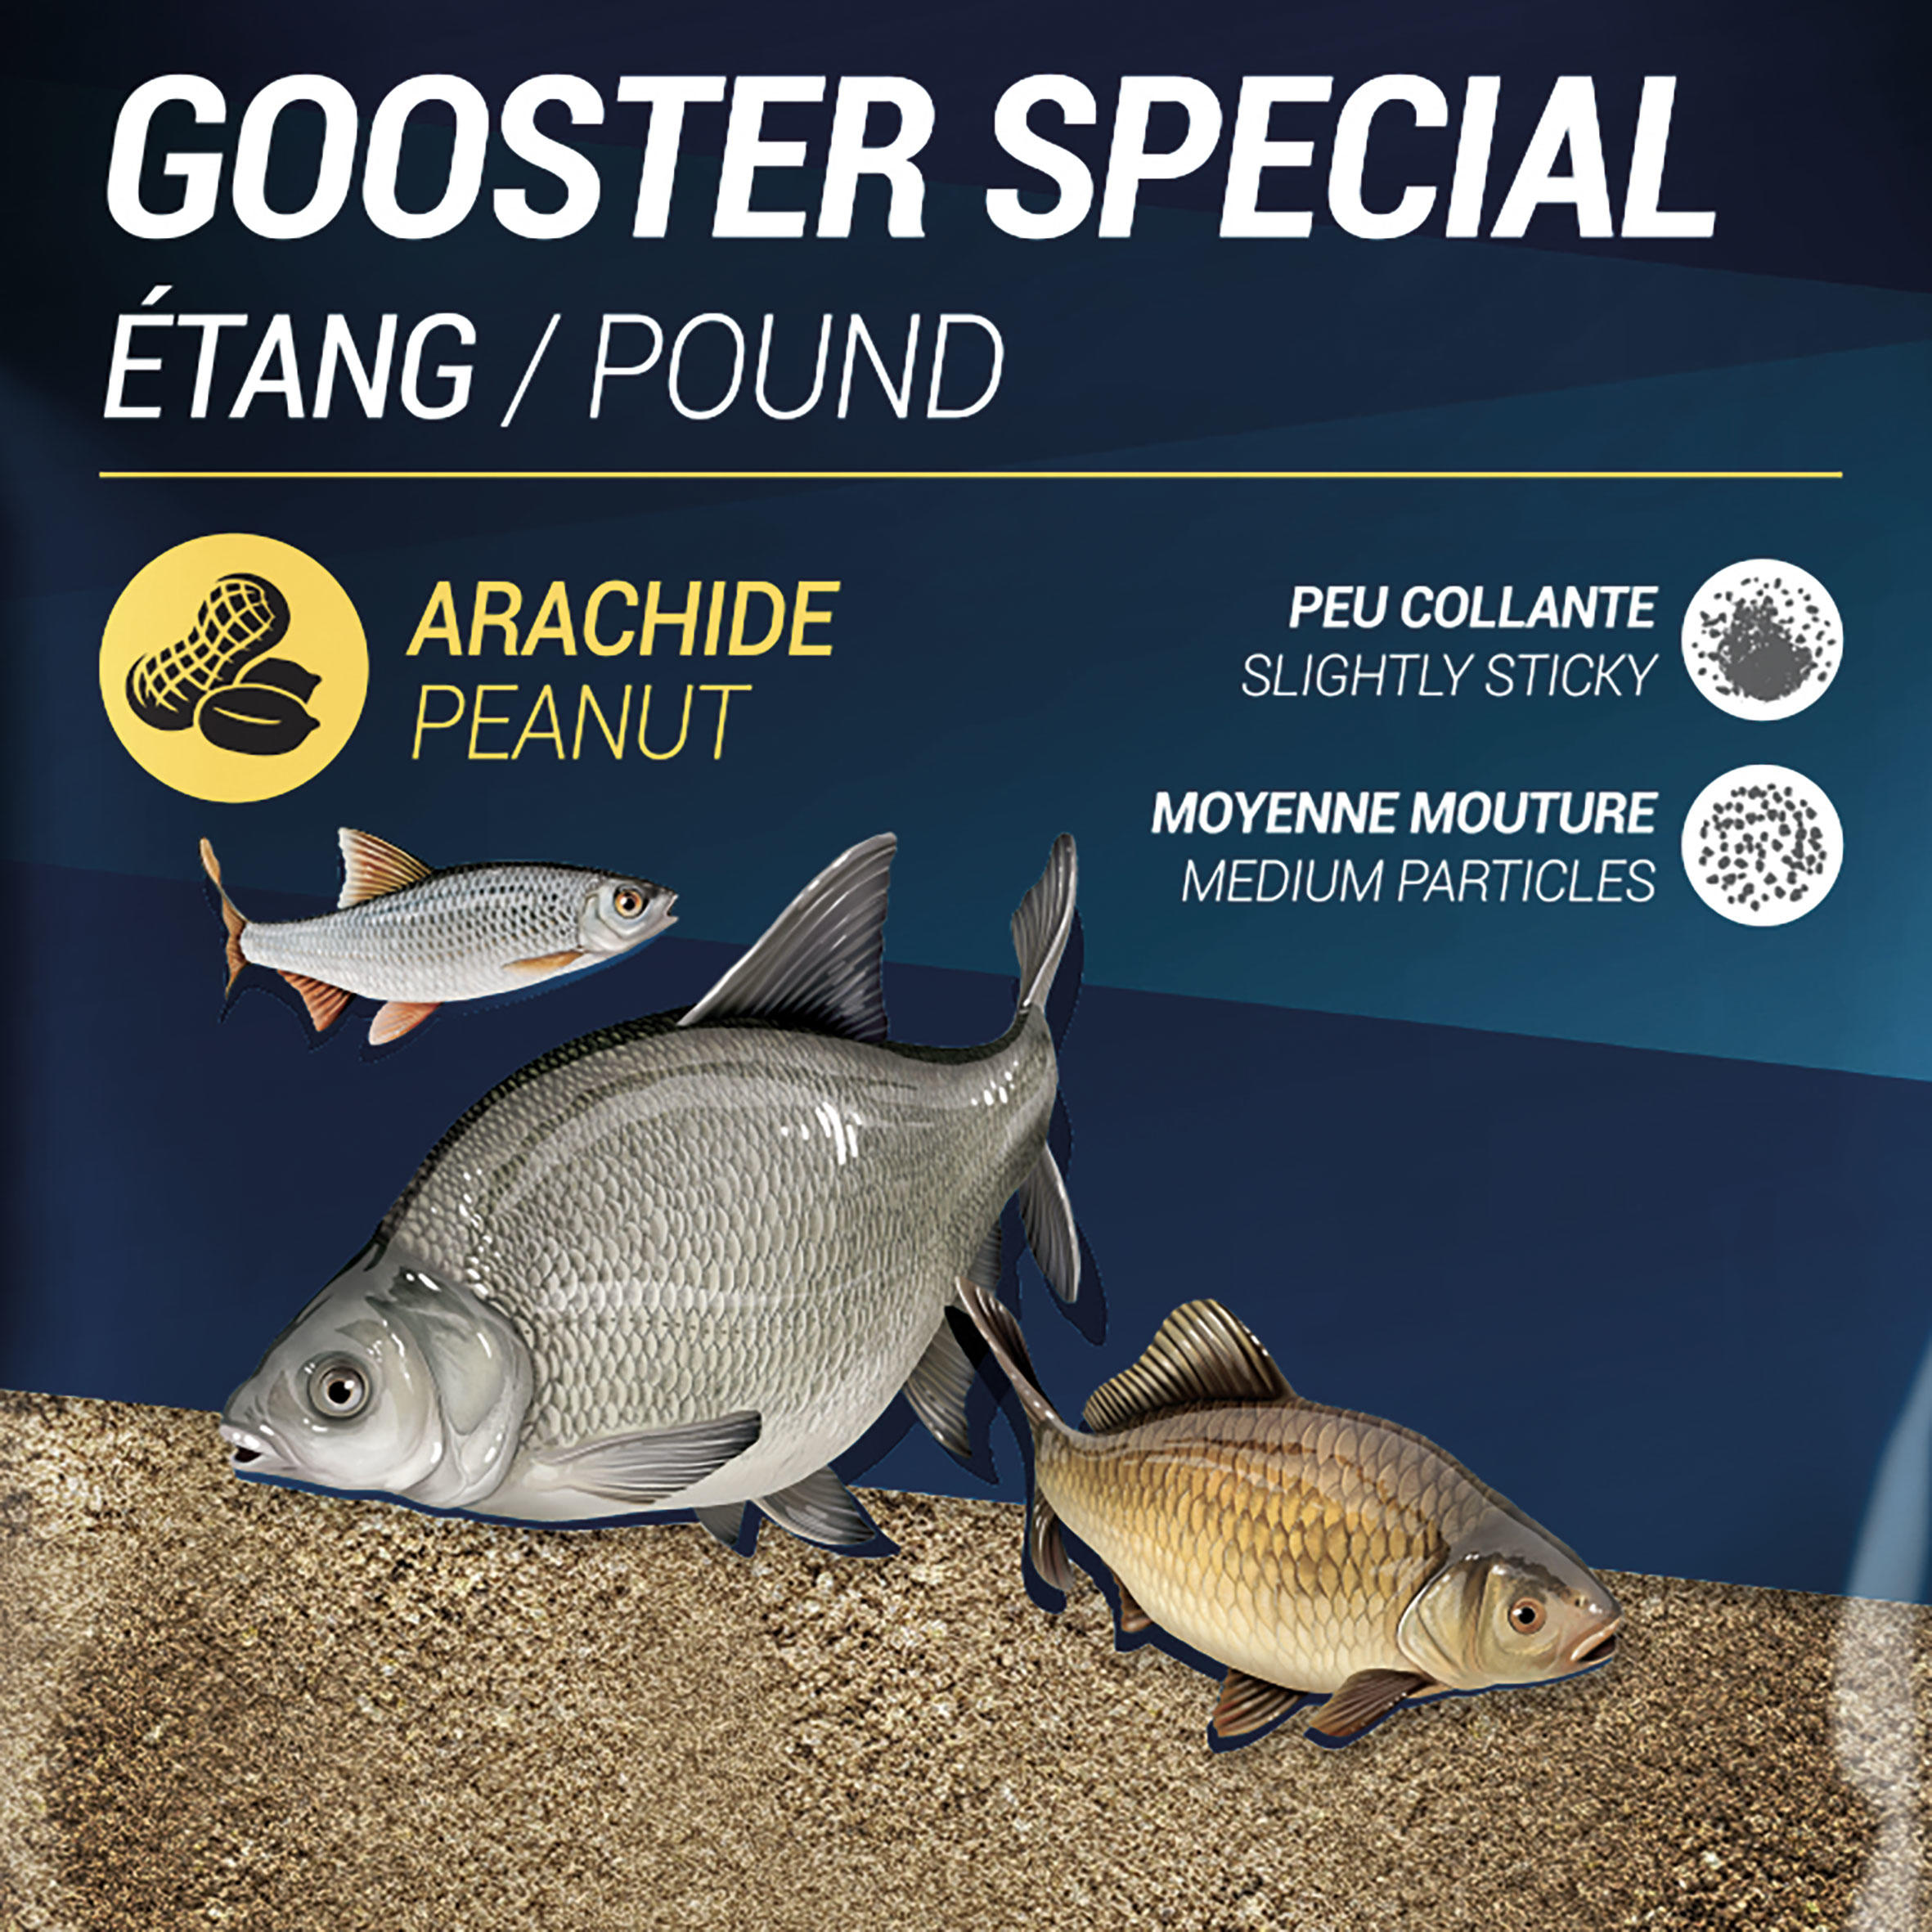 GOOSTER SPECIAL BAIT FOR ALL POND FISH 1kg 2/6